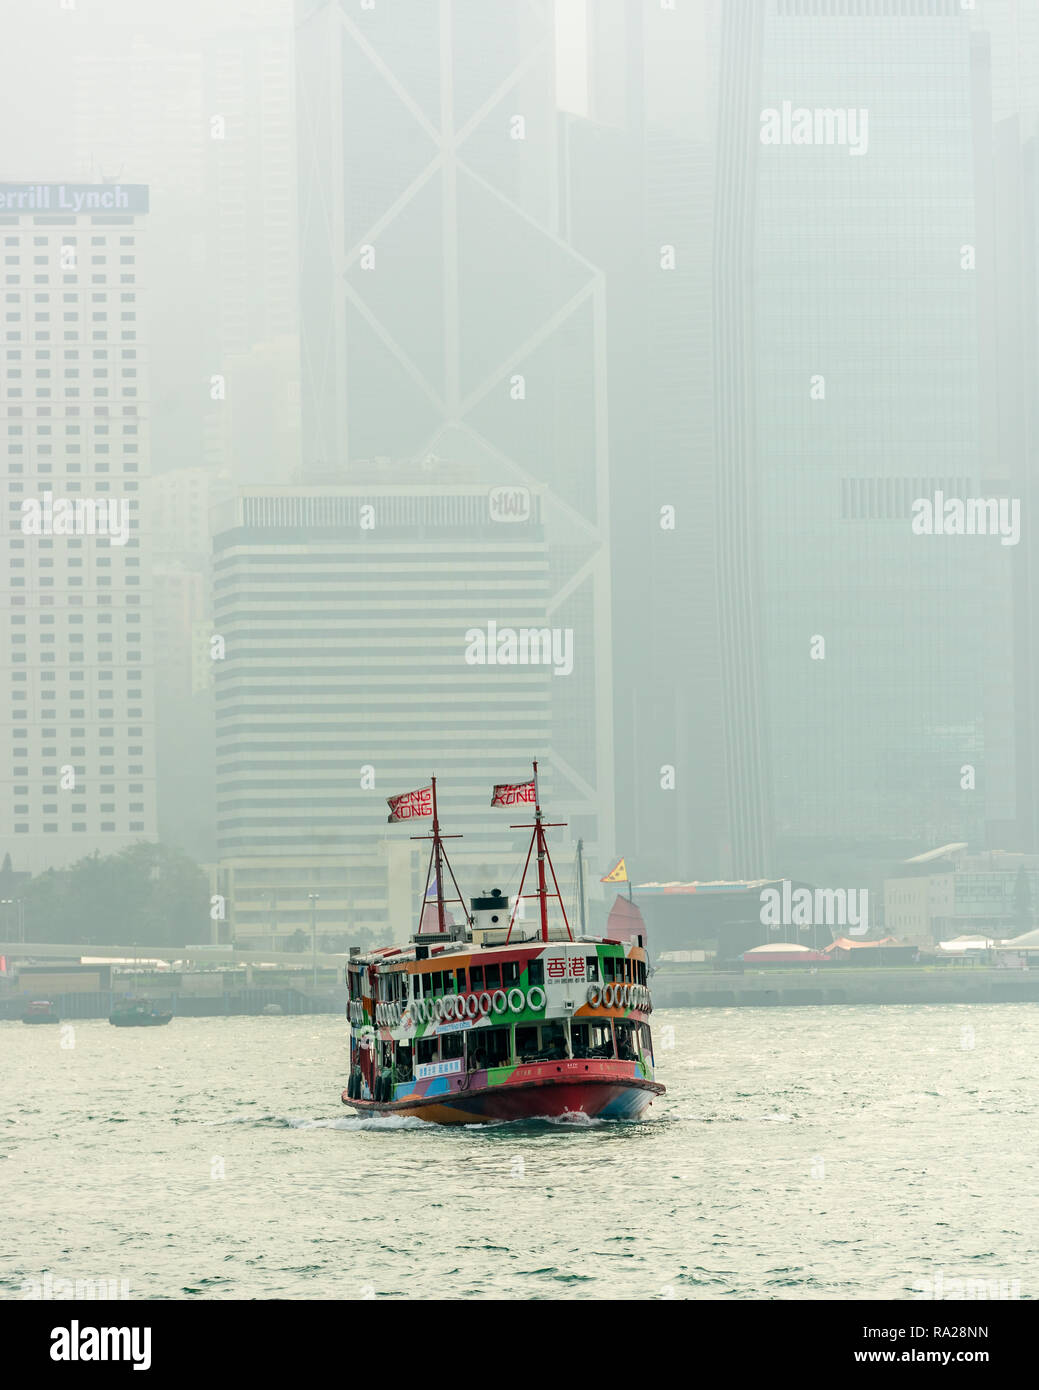 The colourful 'Night Star' Star Ferry plying its trade from Central to Tsim Sha Tsui on Kowloon, with the towers of Hong Kong Island as a backdrop. Stock Photo